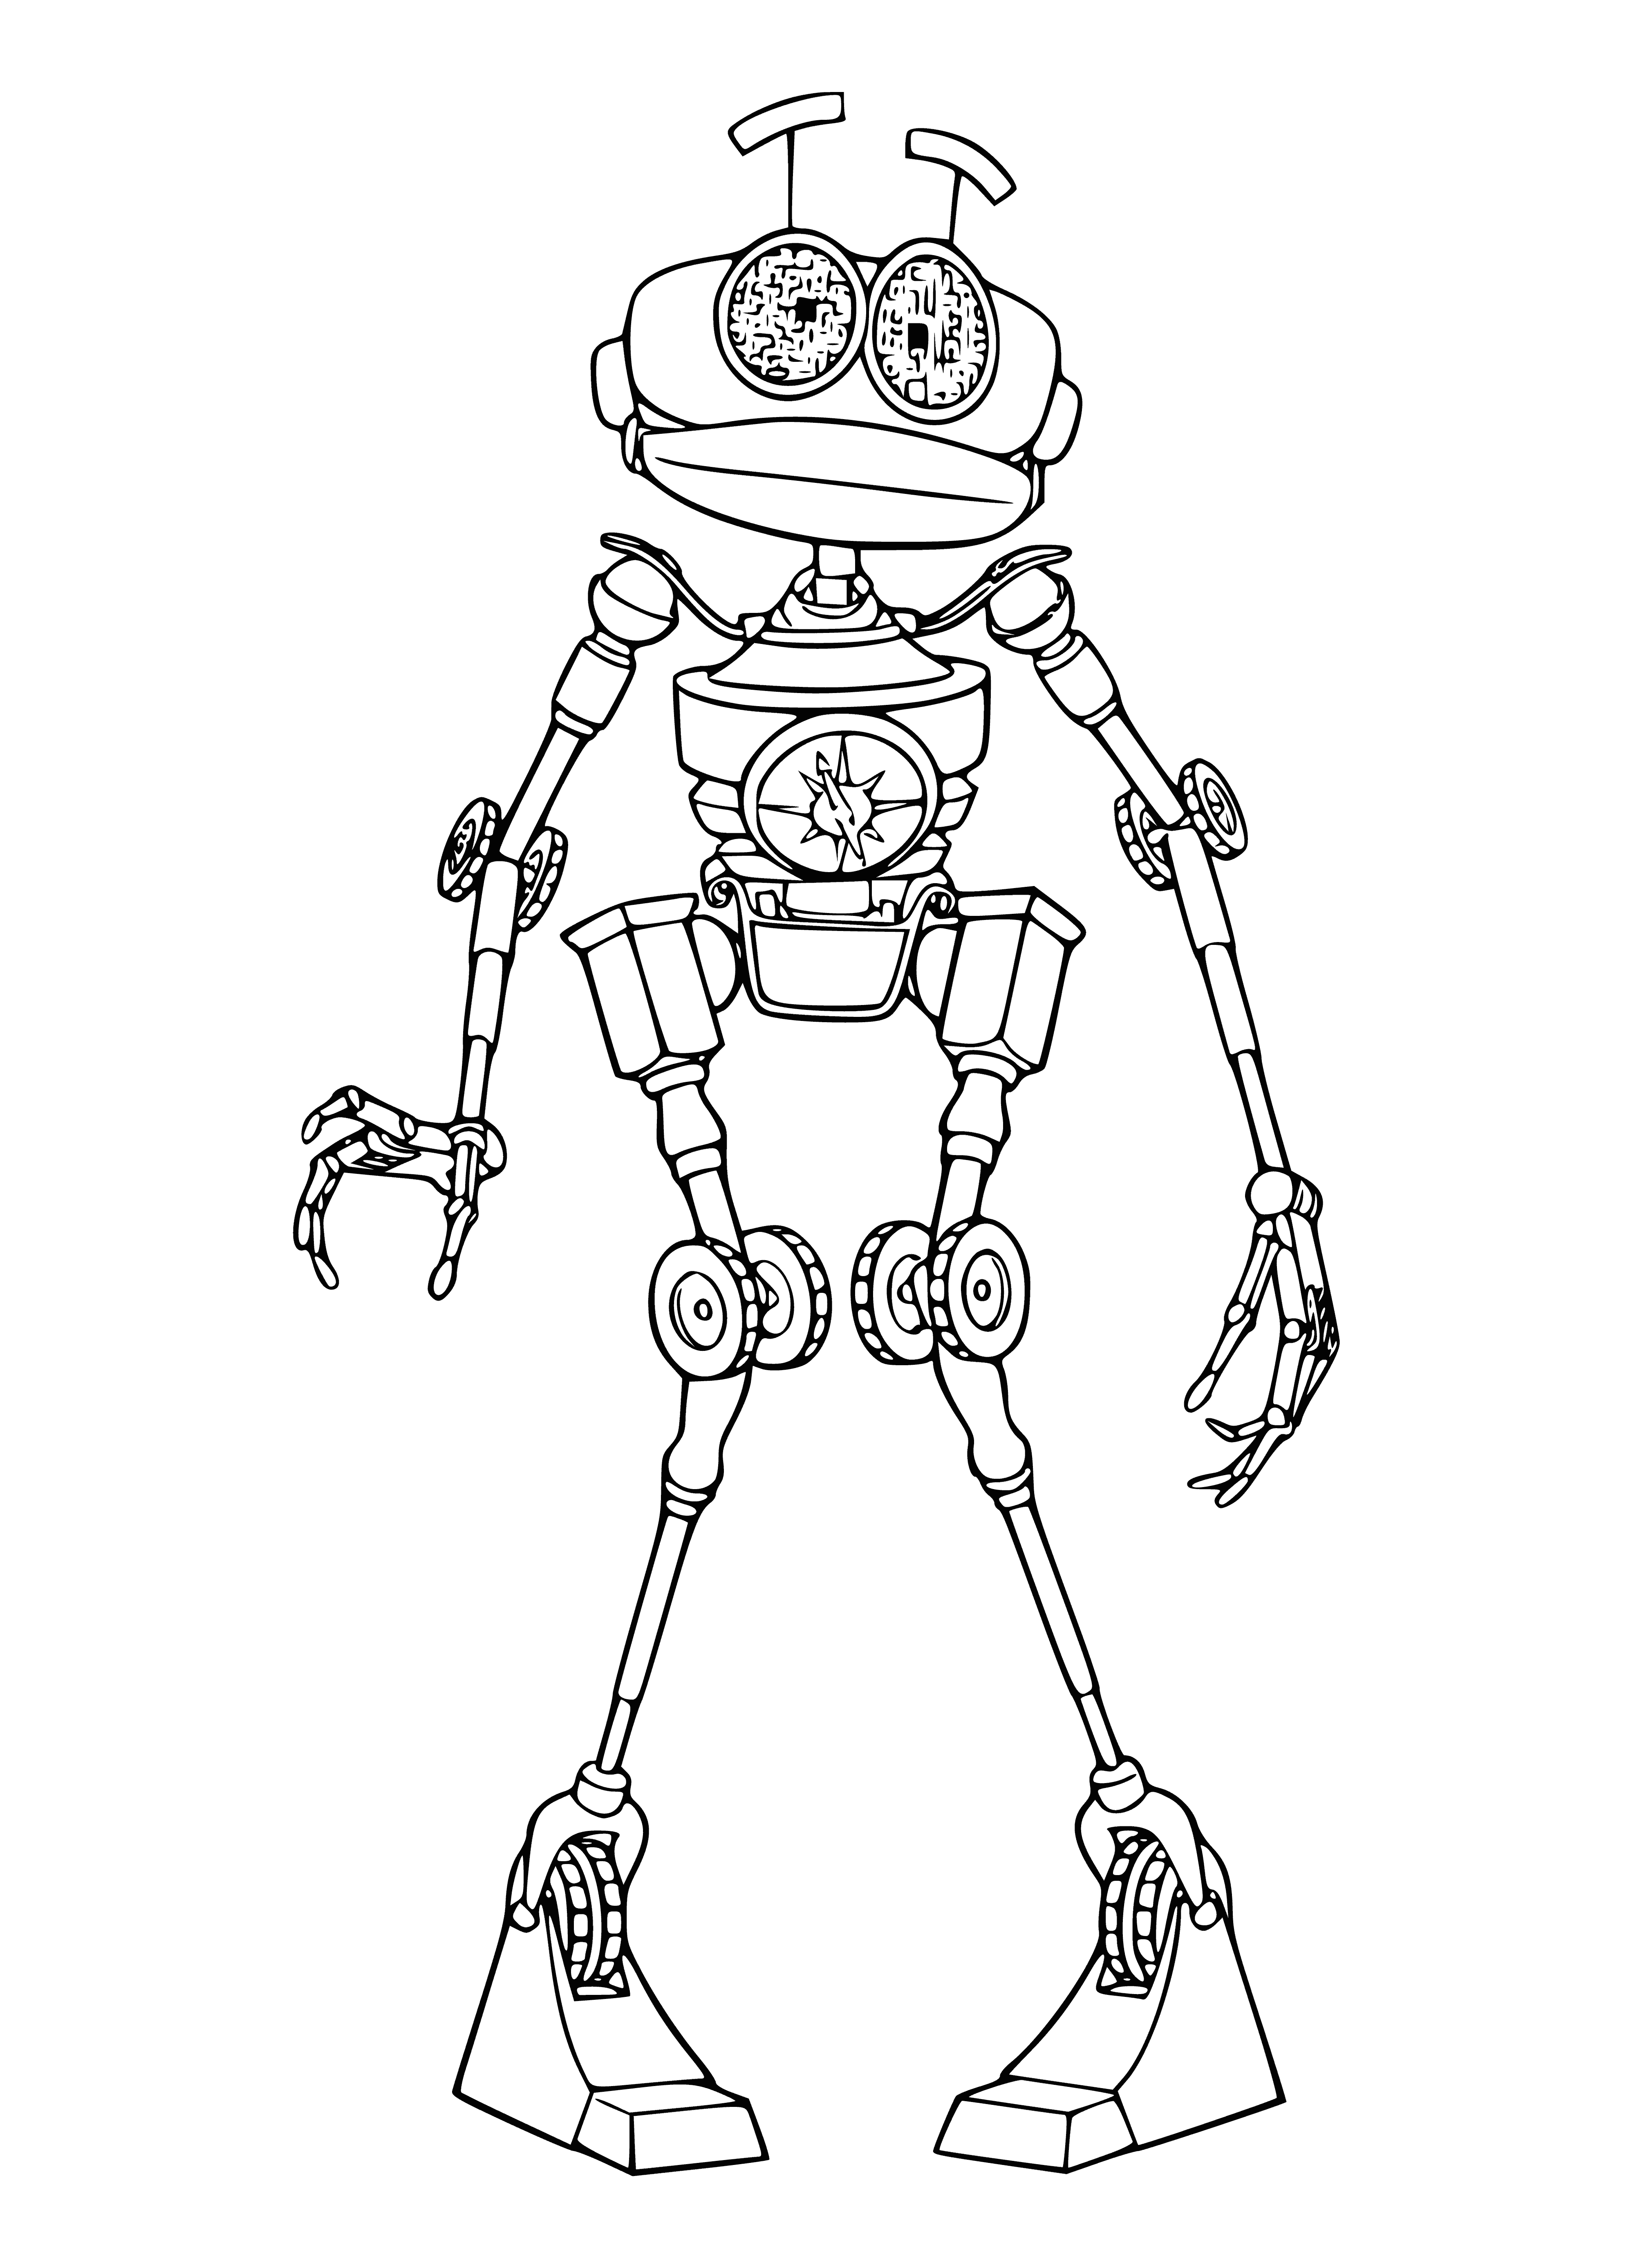 coloring page: Robot Bengan from The Treasure Planet is a metal-plated robot with a big eye, three-fingered claws, and a curved tail.